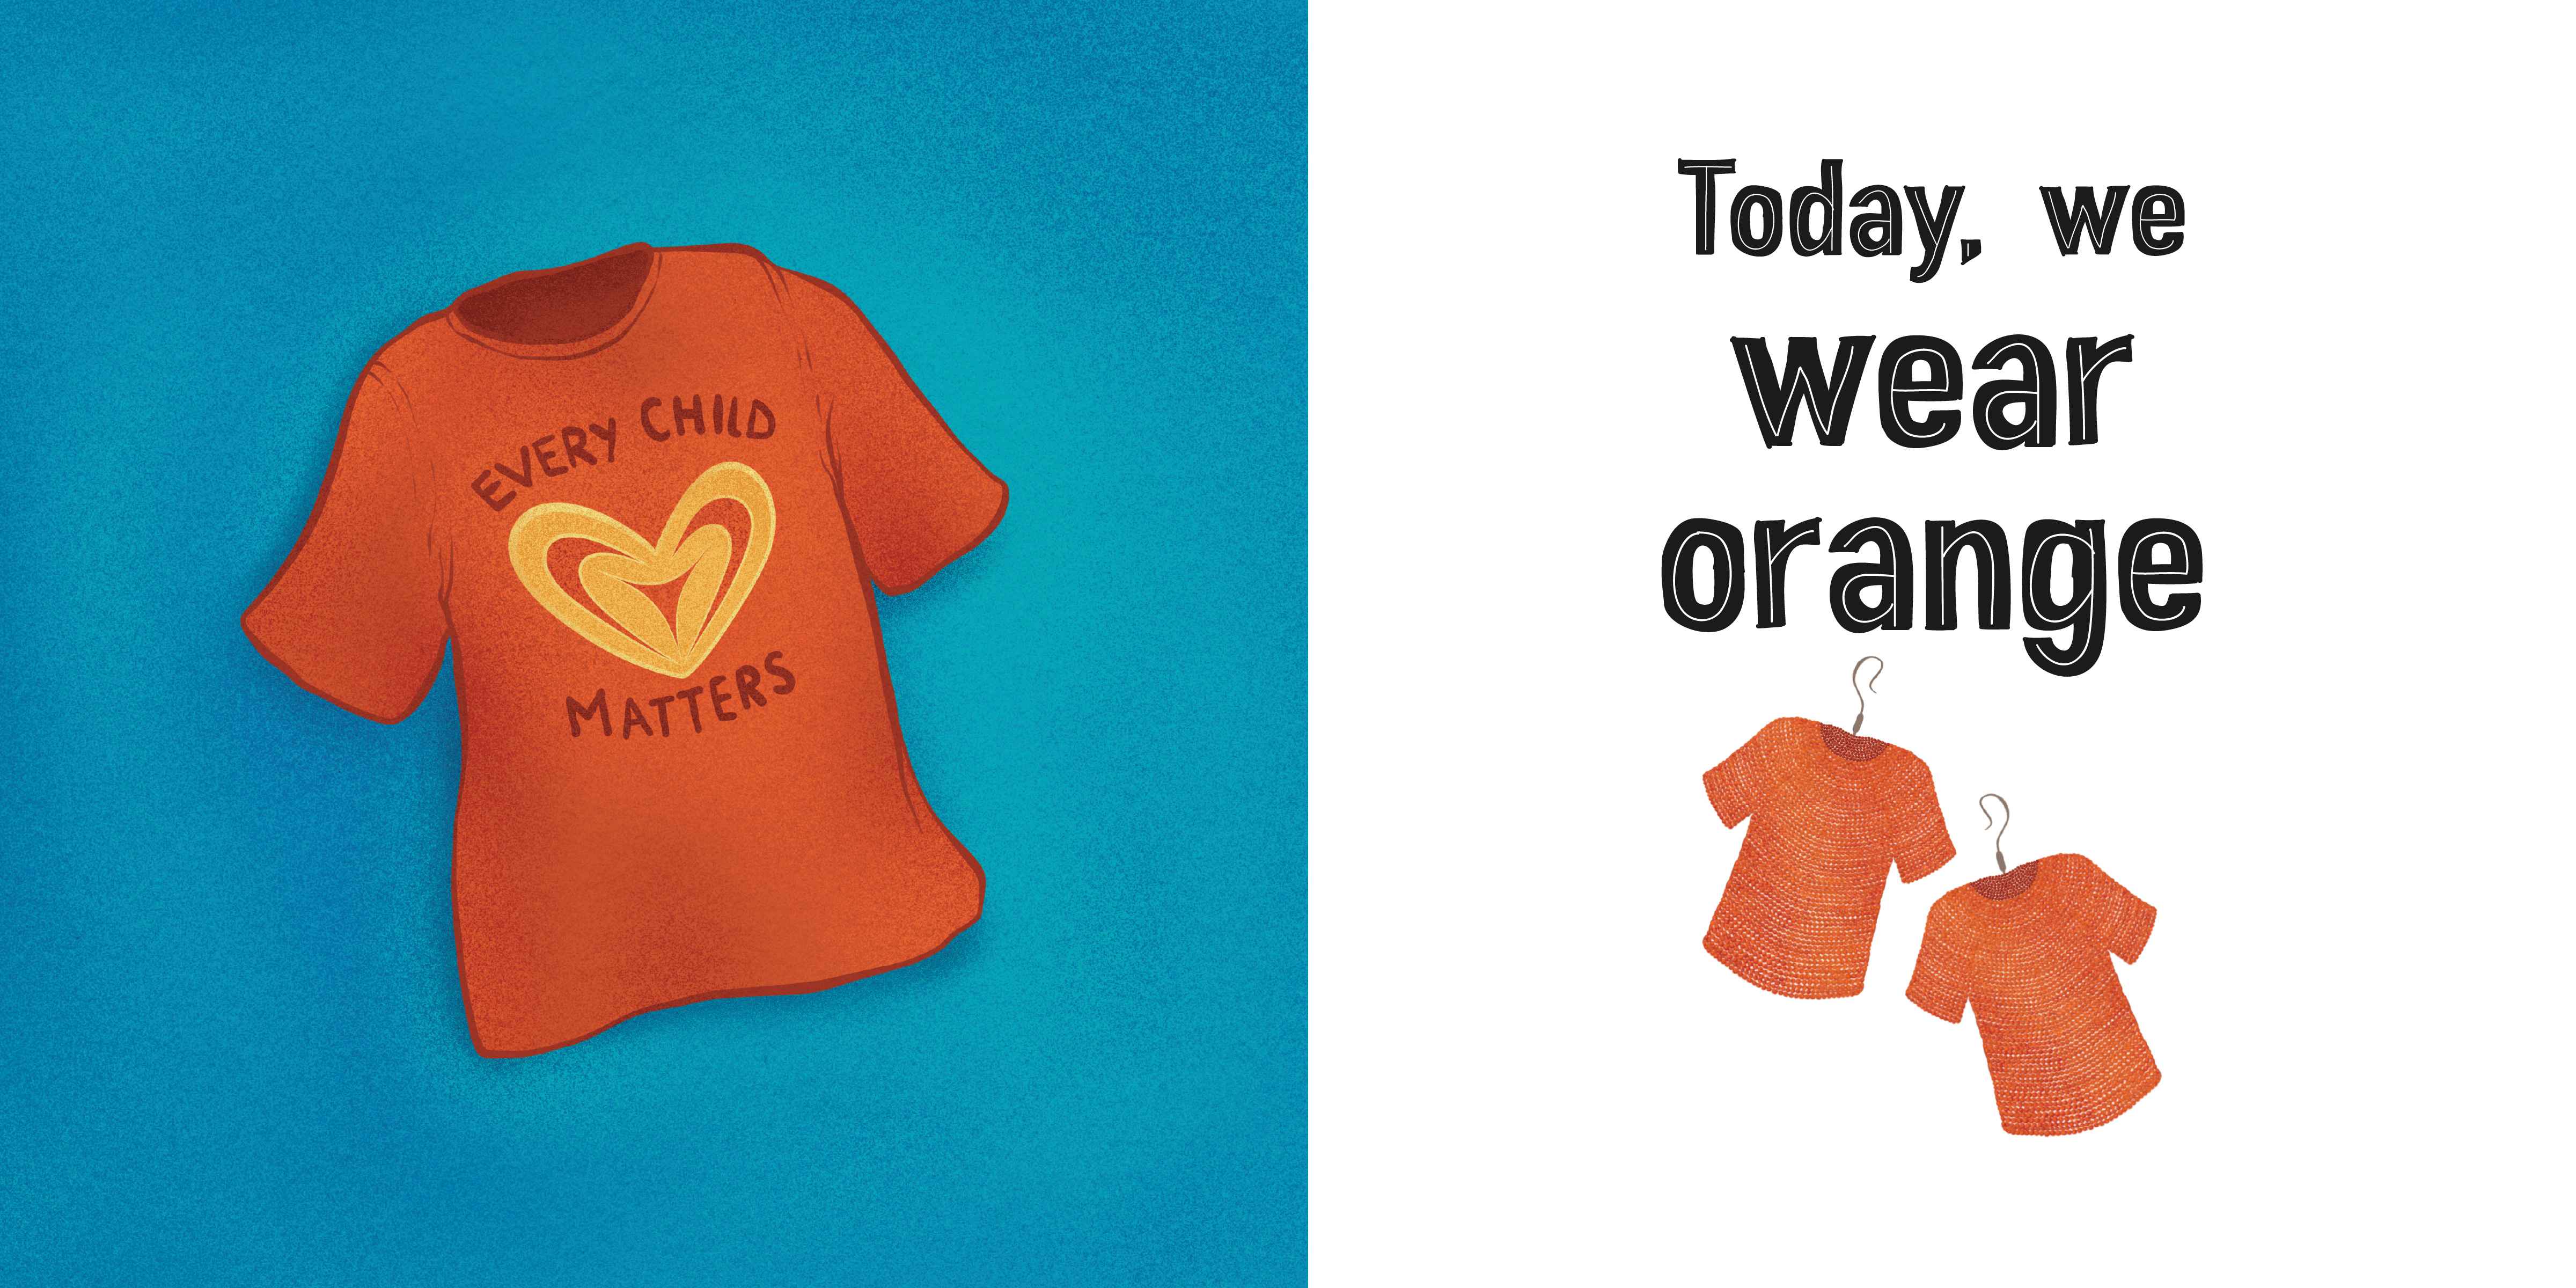 Today is Orange Shirt Day